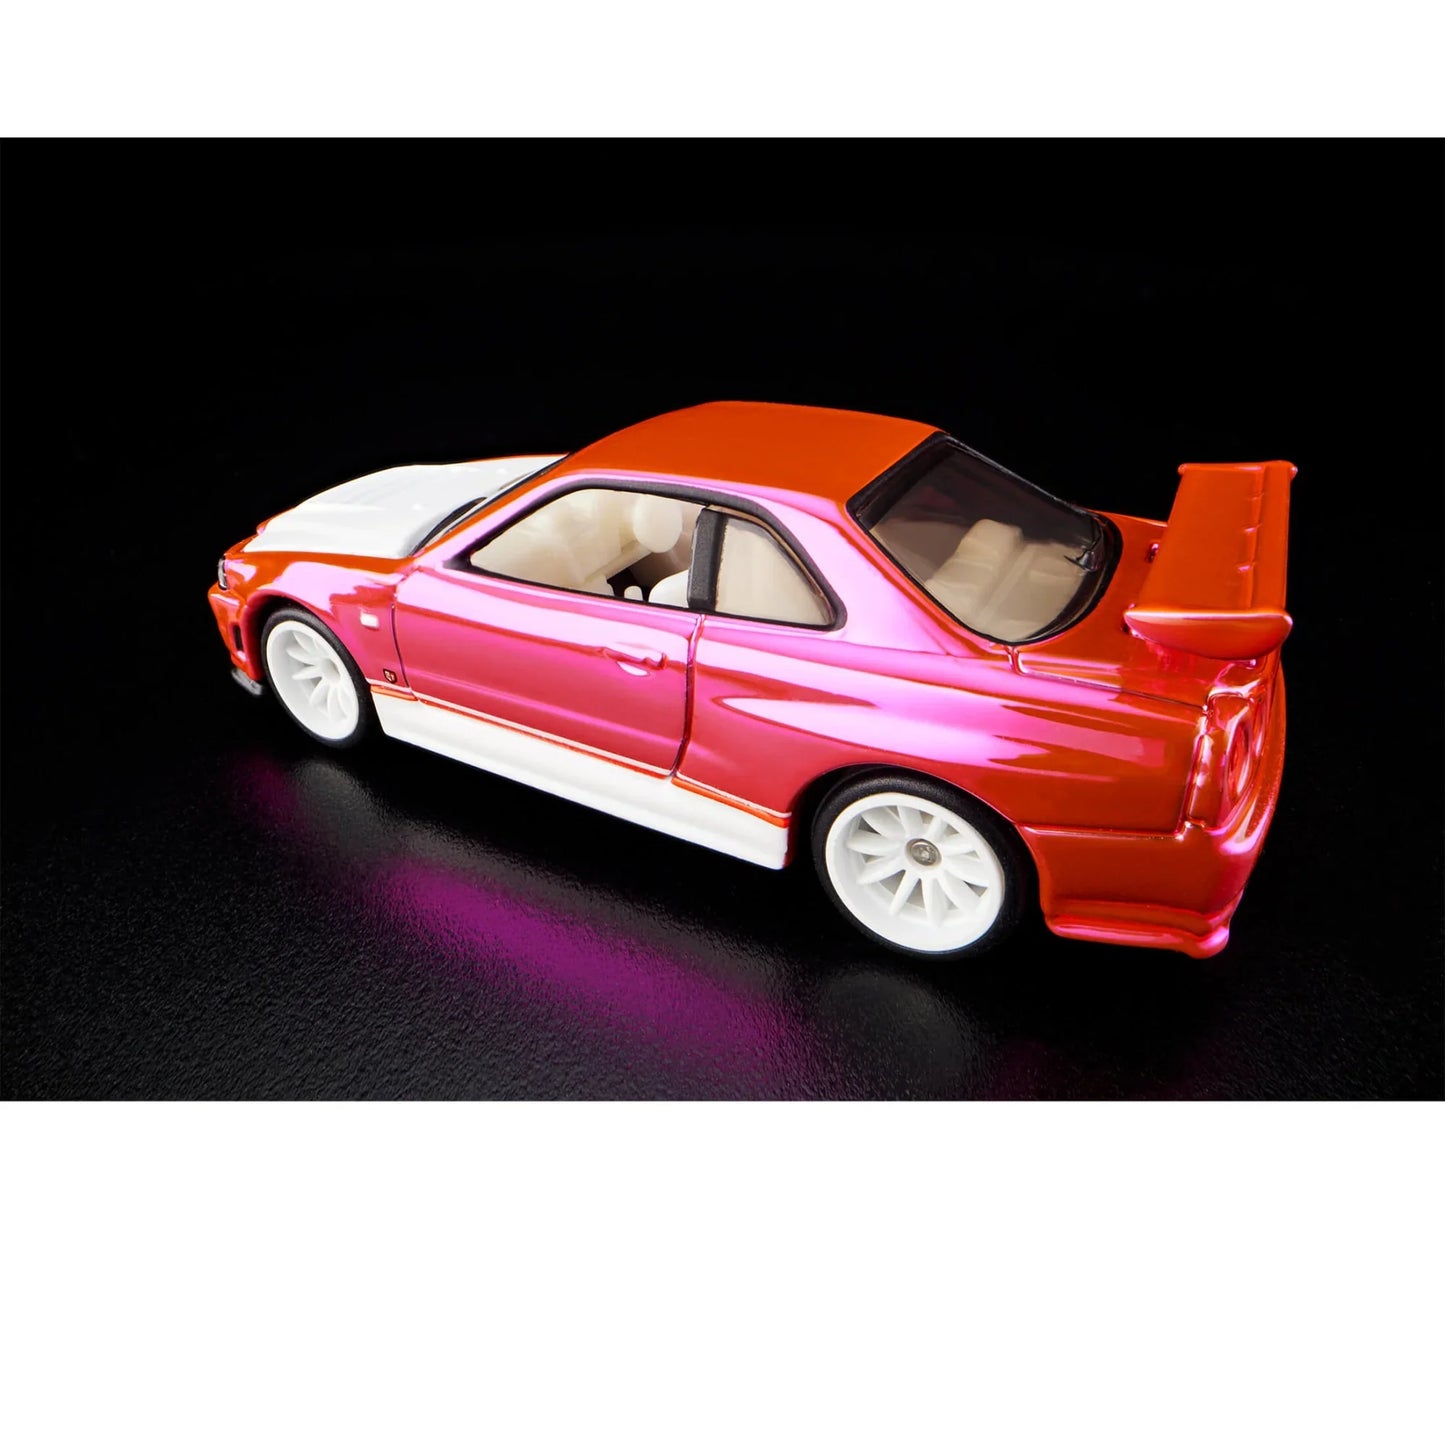 Mattel Creations: Hot Wheels Collectors - RLC Exclusive Pink Editions Nissan Skyline GT-R